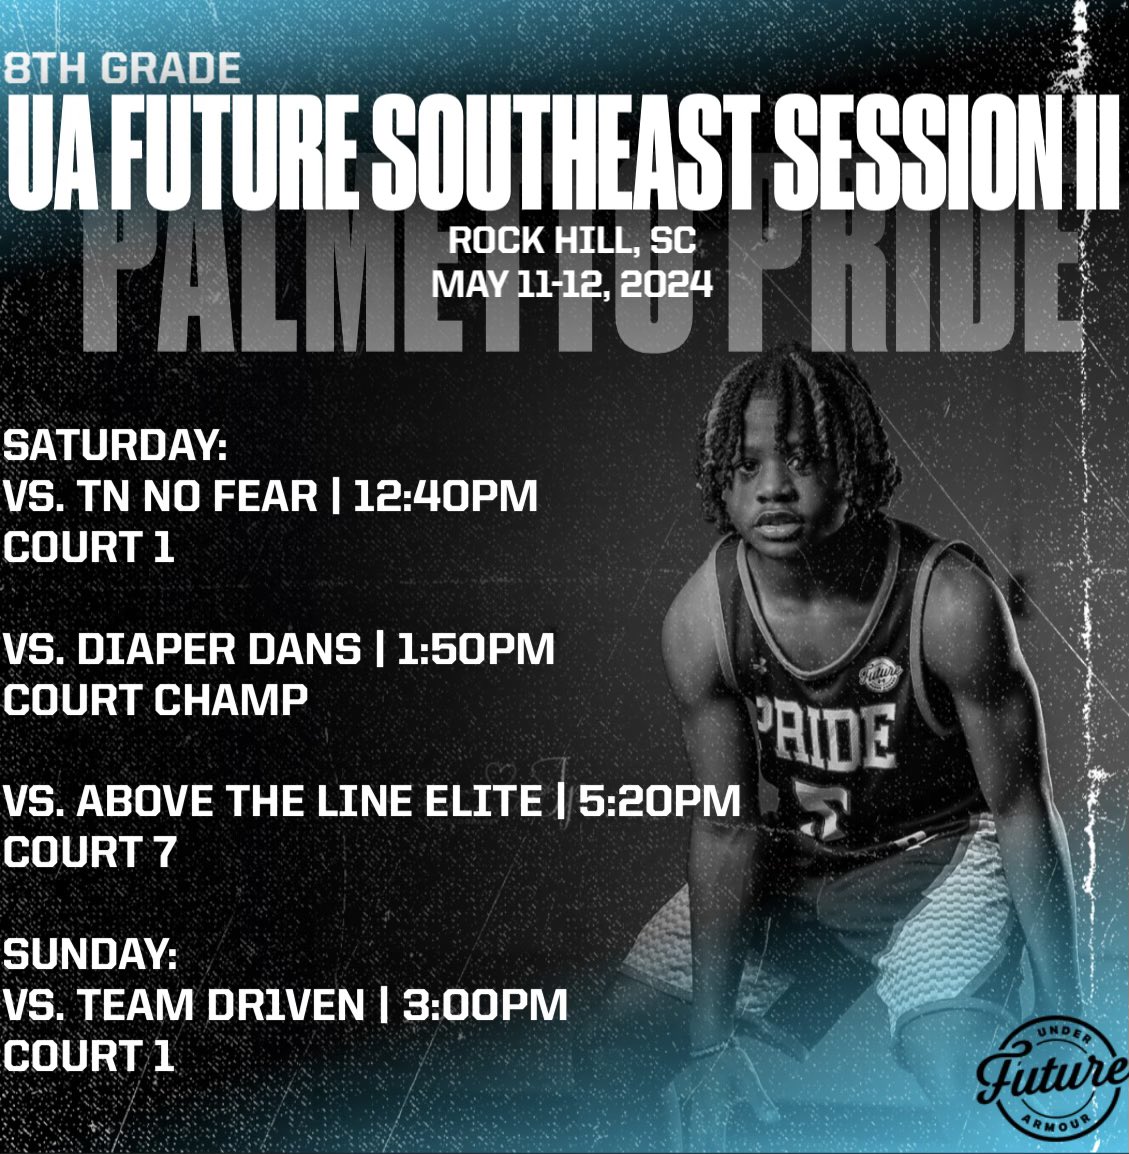 UA Future Session 2 this weekend in Rock Hill, SC!

Check out our schedules in the included graphics!

Let’s go!!! @circuitfuture 

#ThePrideWay 🏀🌙🌴 #Forever45 🩵🧡
#UAFuture 🔒🔗